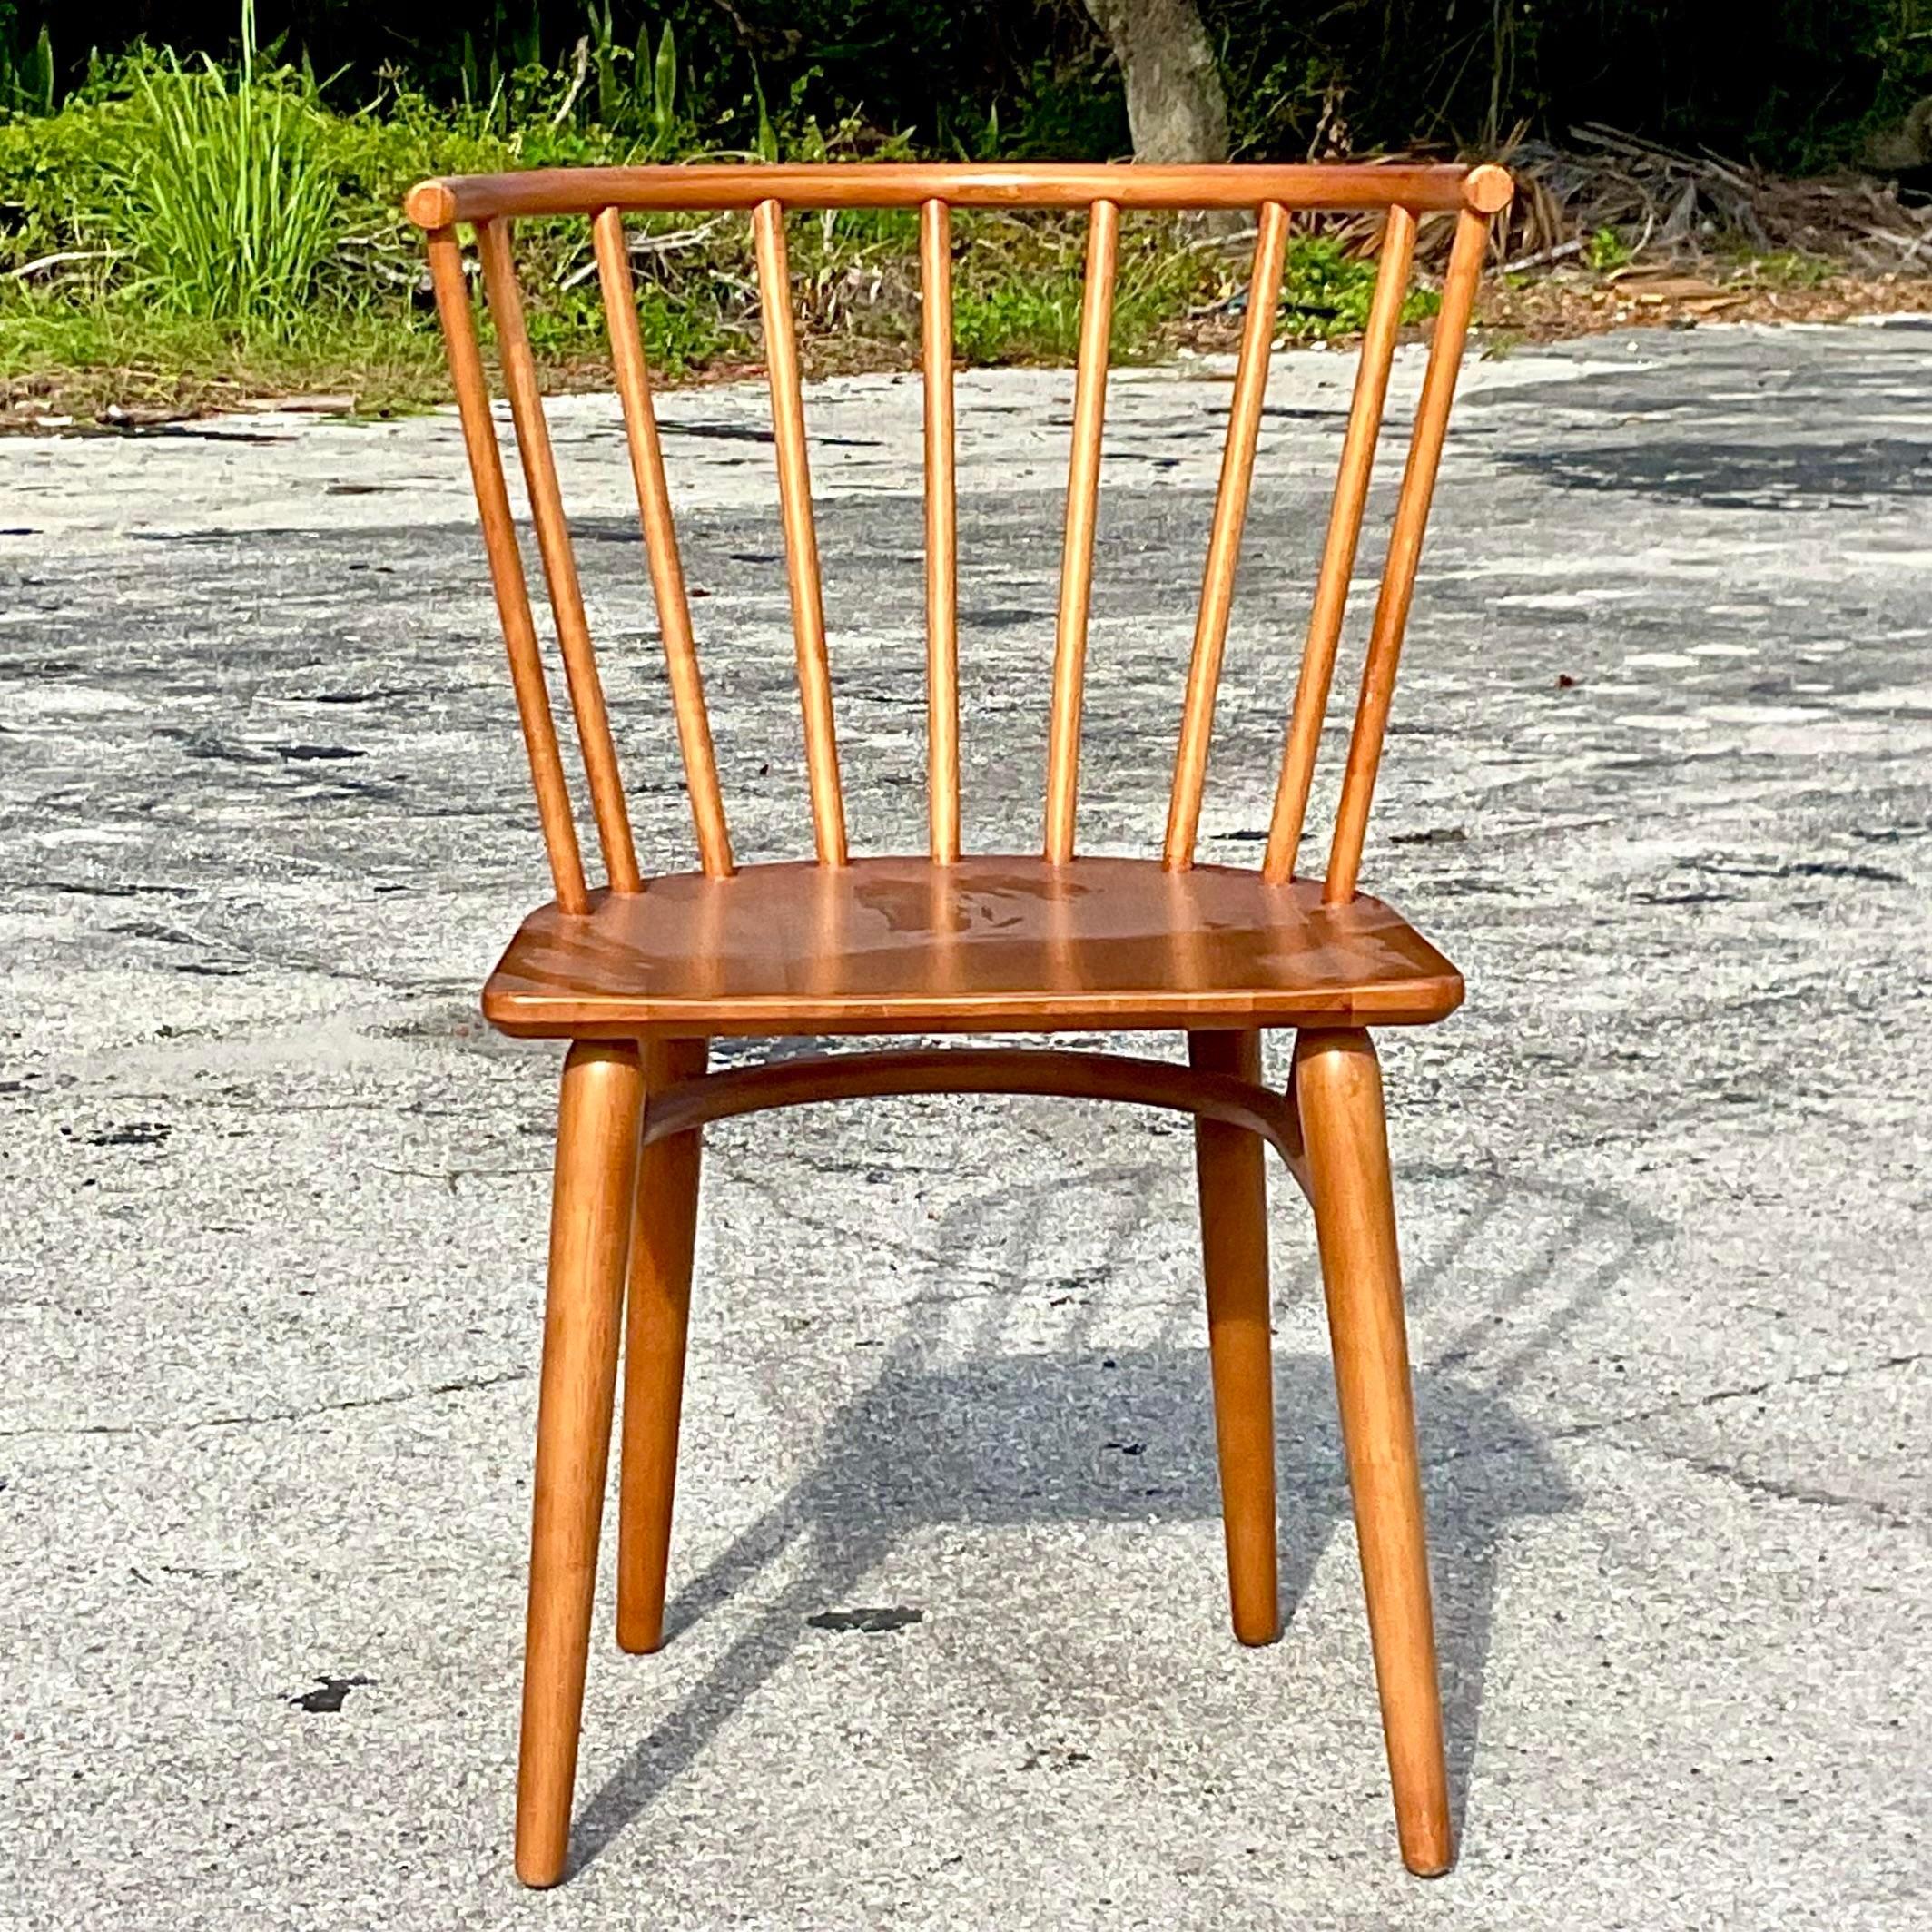 A fabulous vintage Contemporary chair. A chic and simple design with a curved back and thin spoke design. Perfect as a chic occasional chair or even the perfect little desk chair. You decide! Acquired from a Palm Beach estate. 